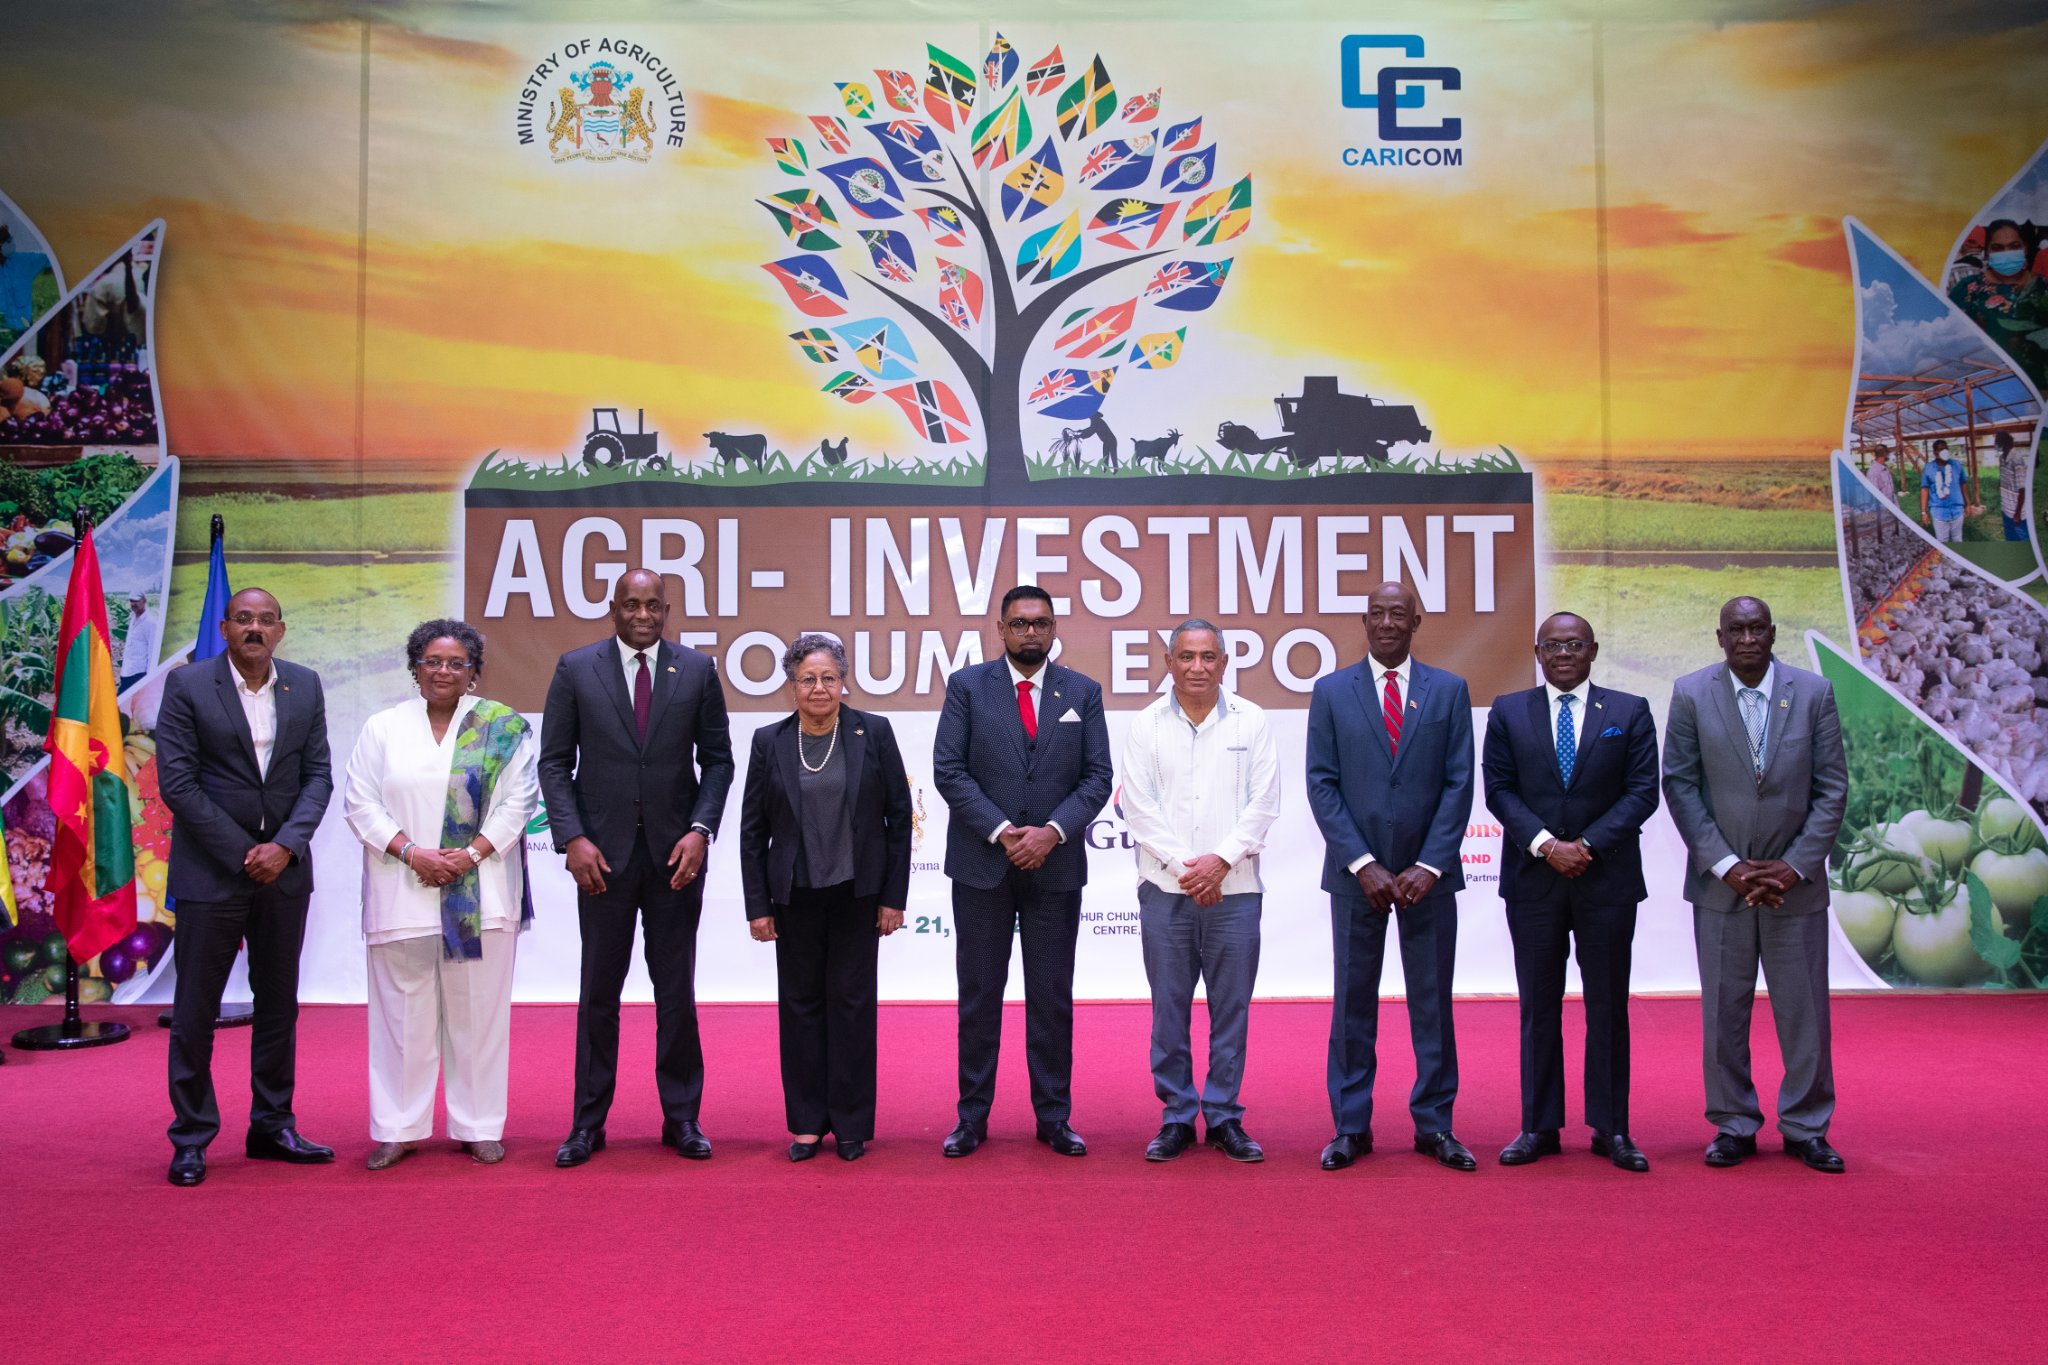 CARICOM leaders standing in a line at the Agri-Investment Forum